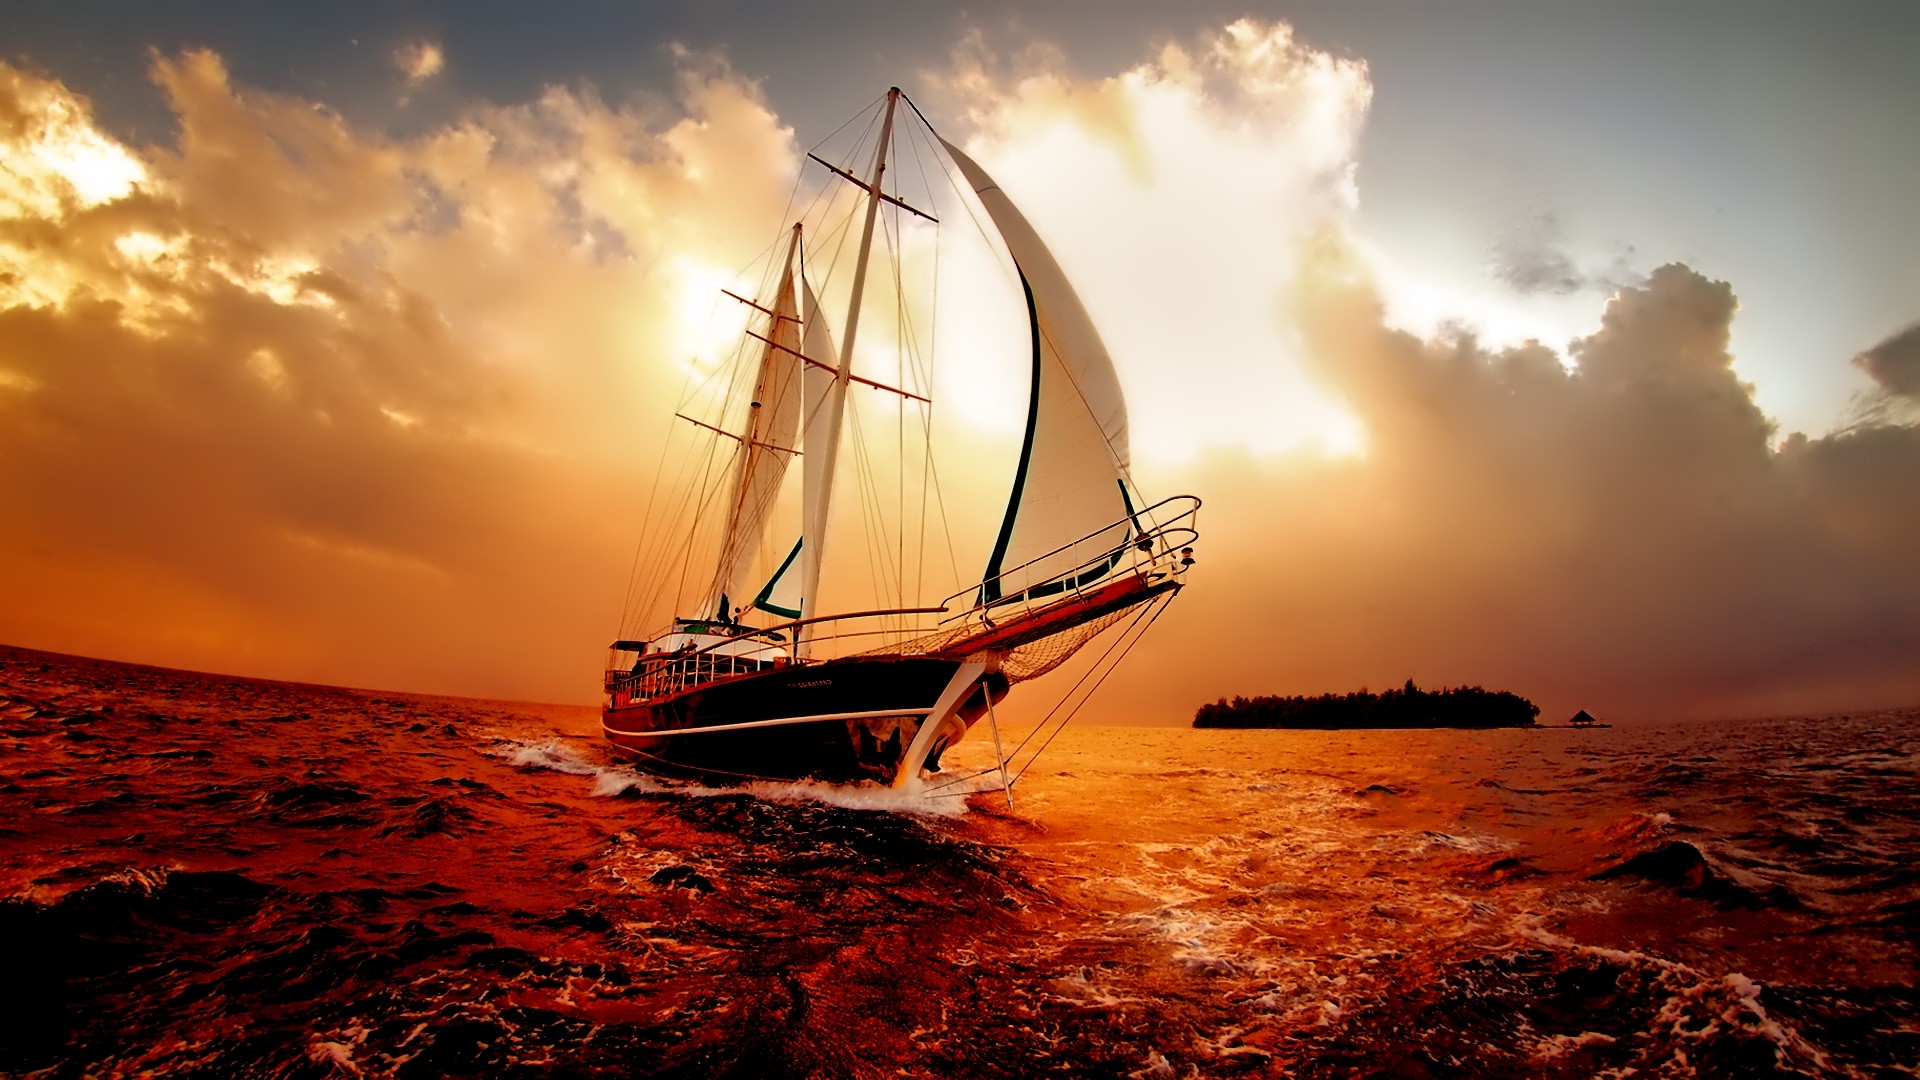 1920x1080 Sunset Sailing [] Need #iPhone #6S #Plus #Wallpaper/ #Background  for #IPhone6SPlus? Follow iPhone 6S Plus 3Wallpapers/ #Backgrounds Must t…